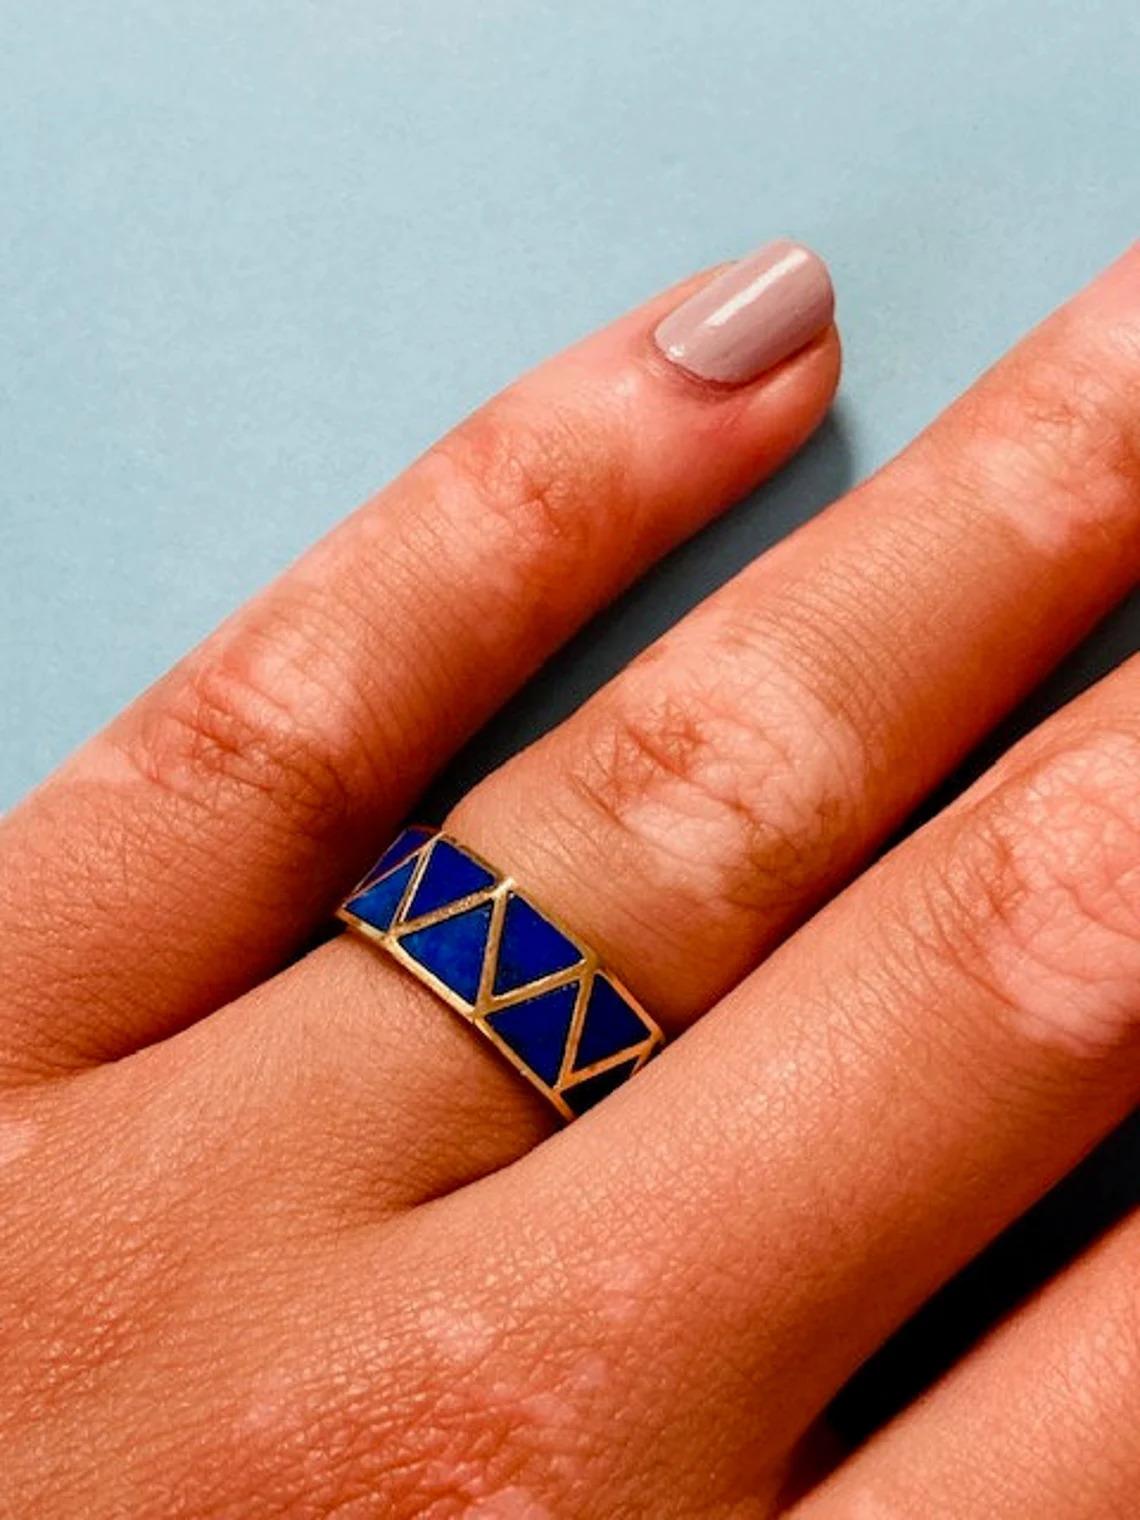 Vintage 18k Gold Lapis Lazuli Zig-Zag Ring Limited Edition, Size L UK/AU

This cool, vintage ring made of striking lapis lazuli and 18k yellow gold is the perfect accompaniment to any look. It's geometric, mosaic-style pattern adds a pop of colour